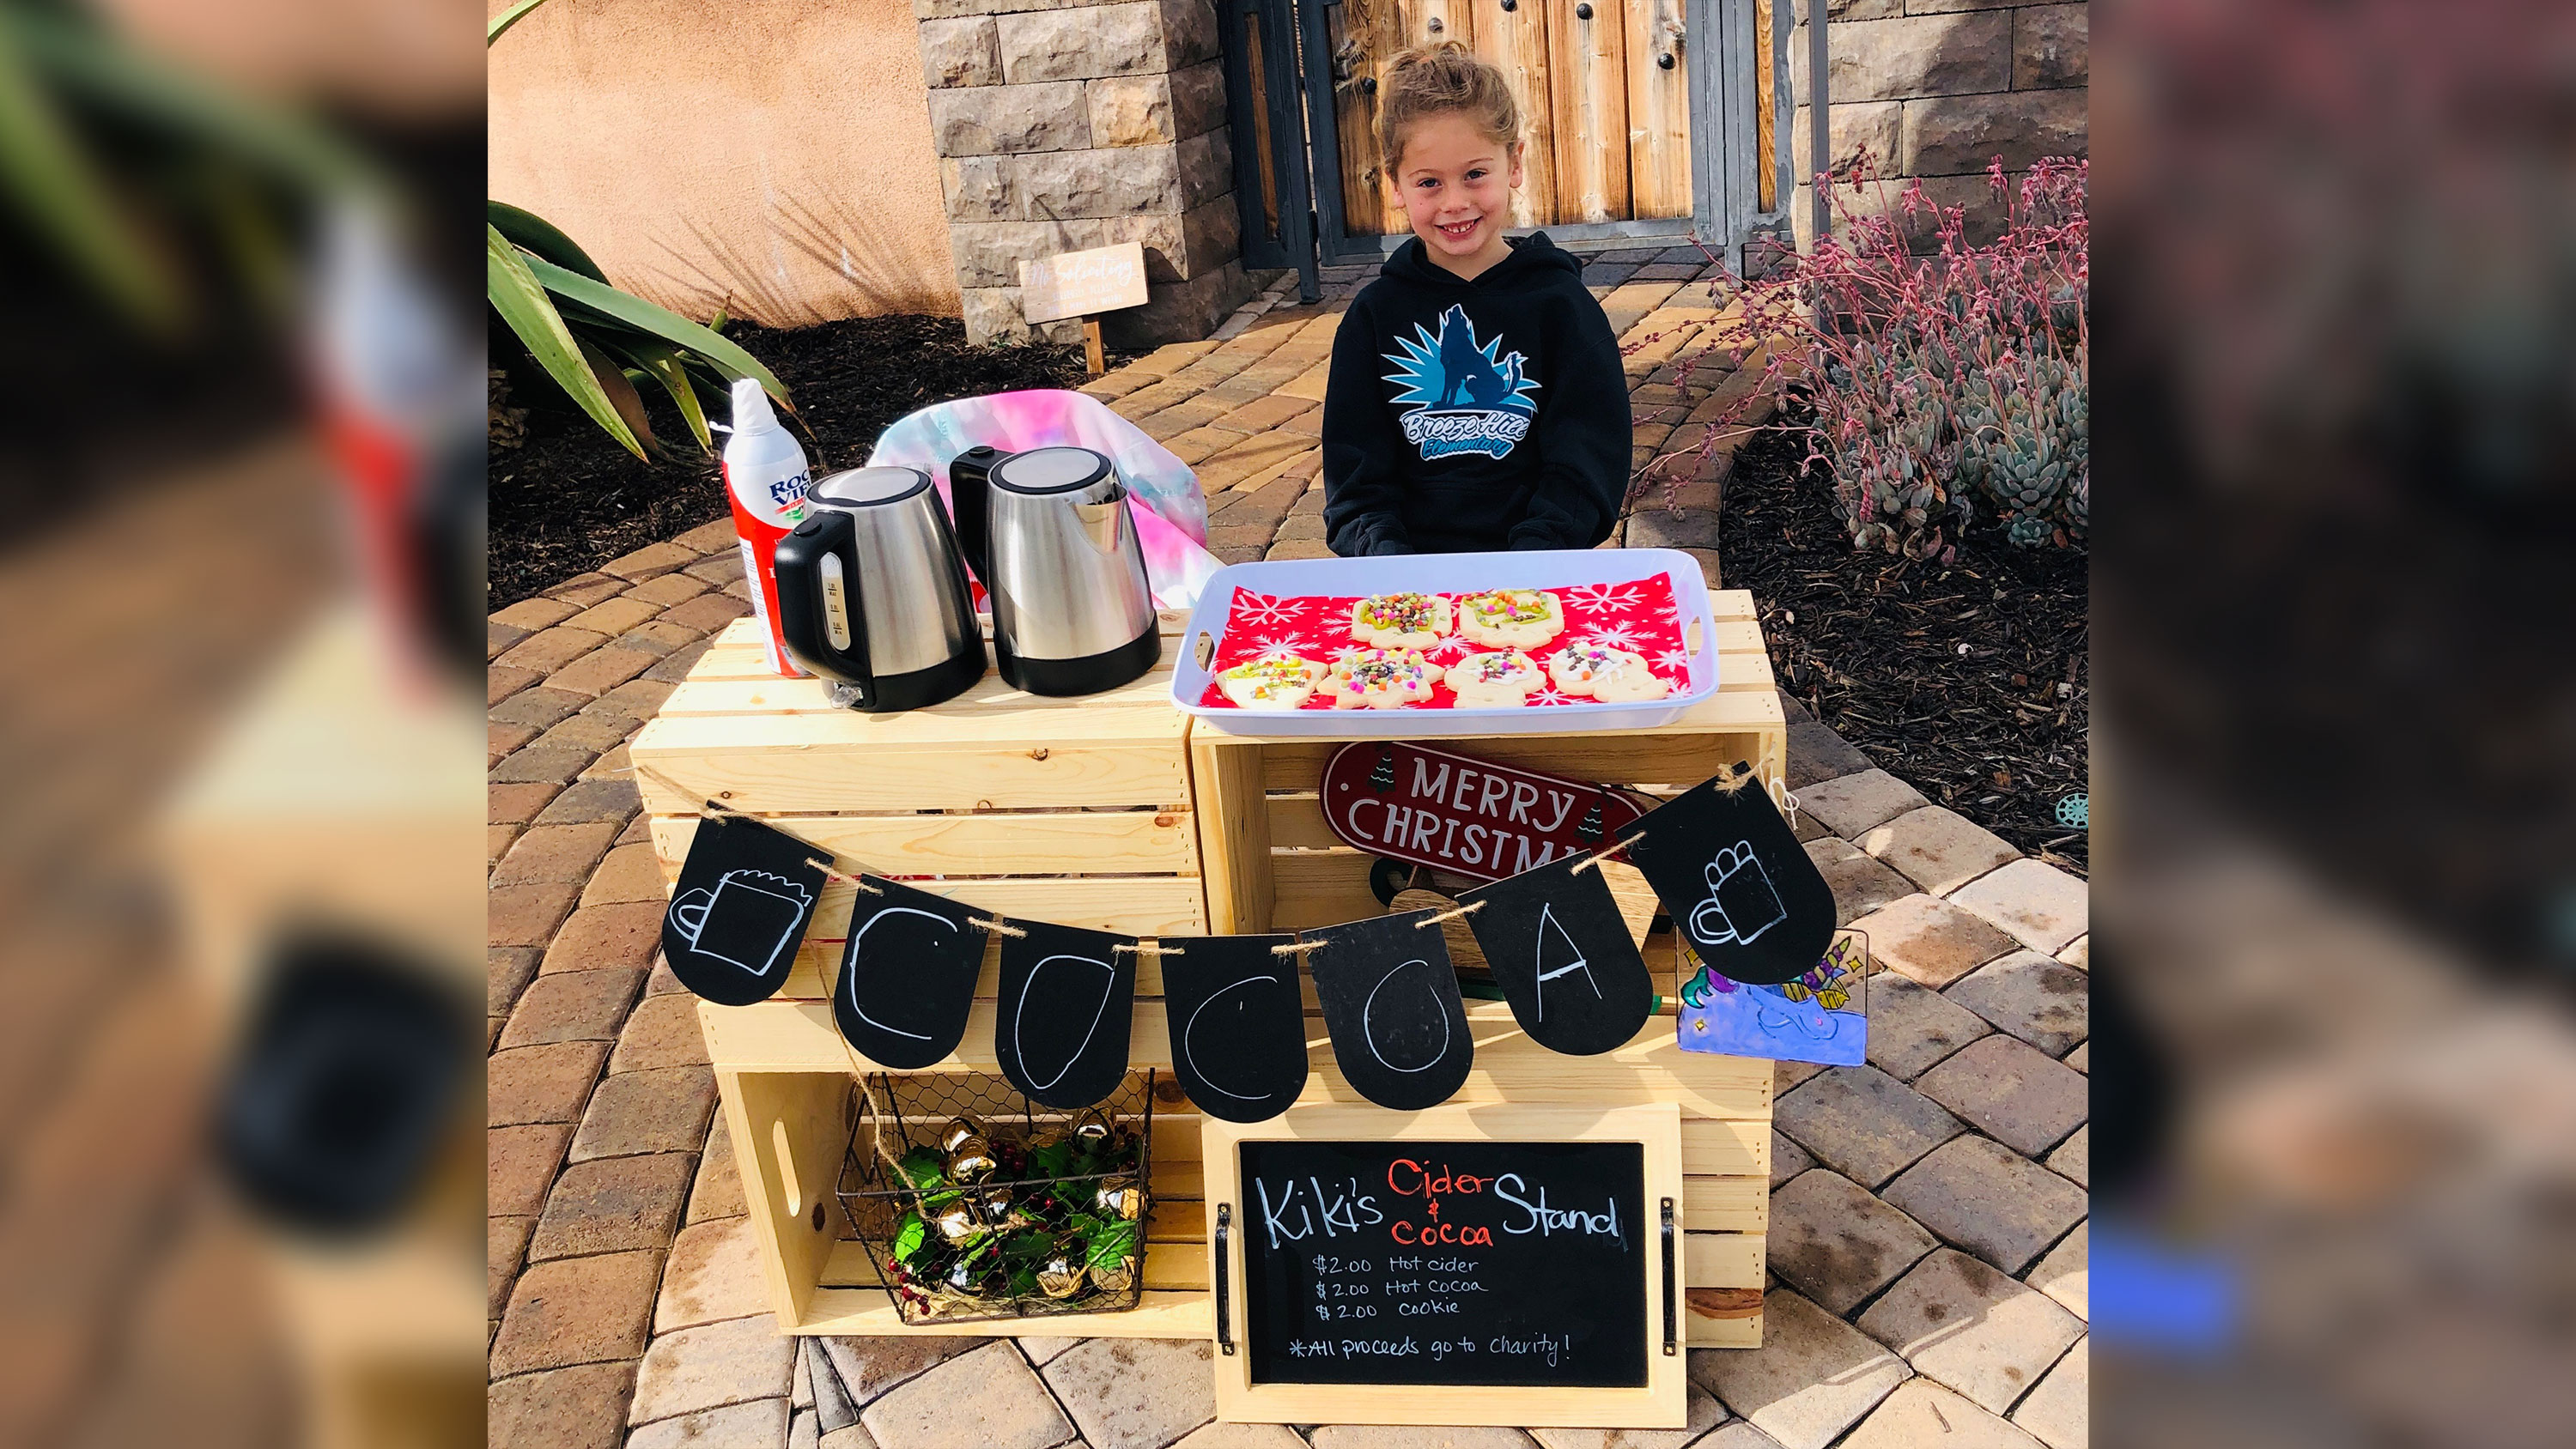 Katelynn Hardee, a 5-year-old kindergartner at Breeze Hill Elementary School, paid off the negative lunch balances of more than 100 students at her school. (Credit: Karina Hardee)